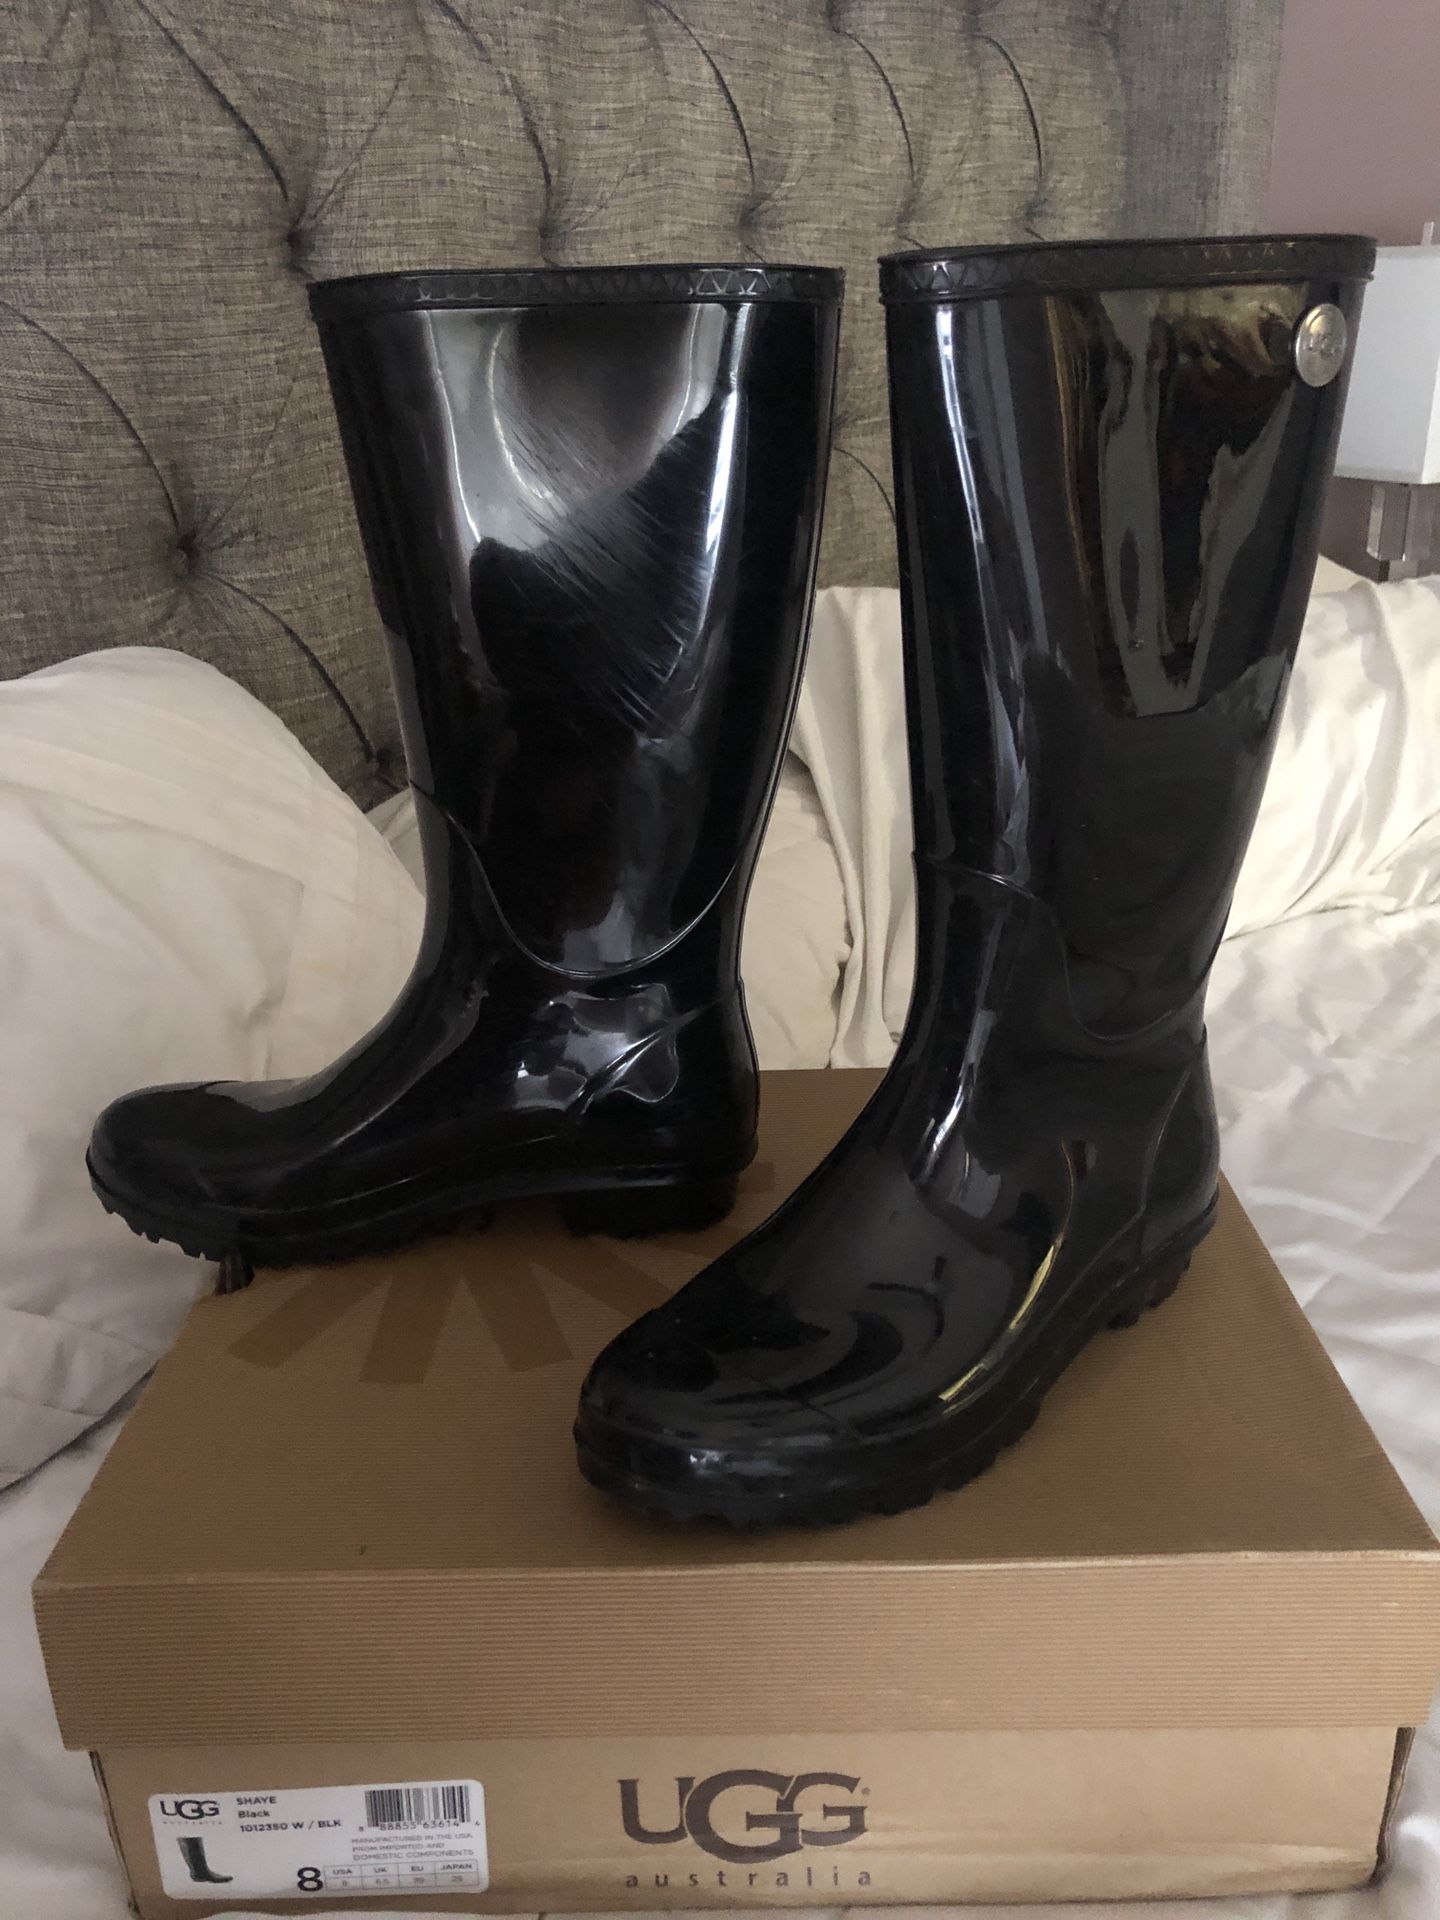 UGG rain boots for sale!